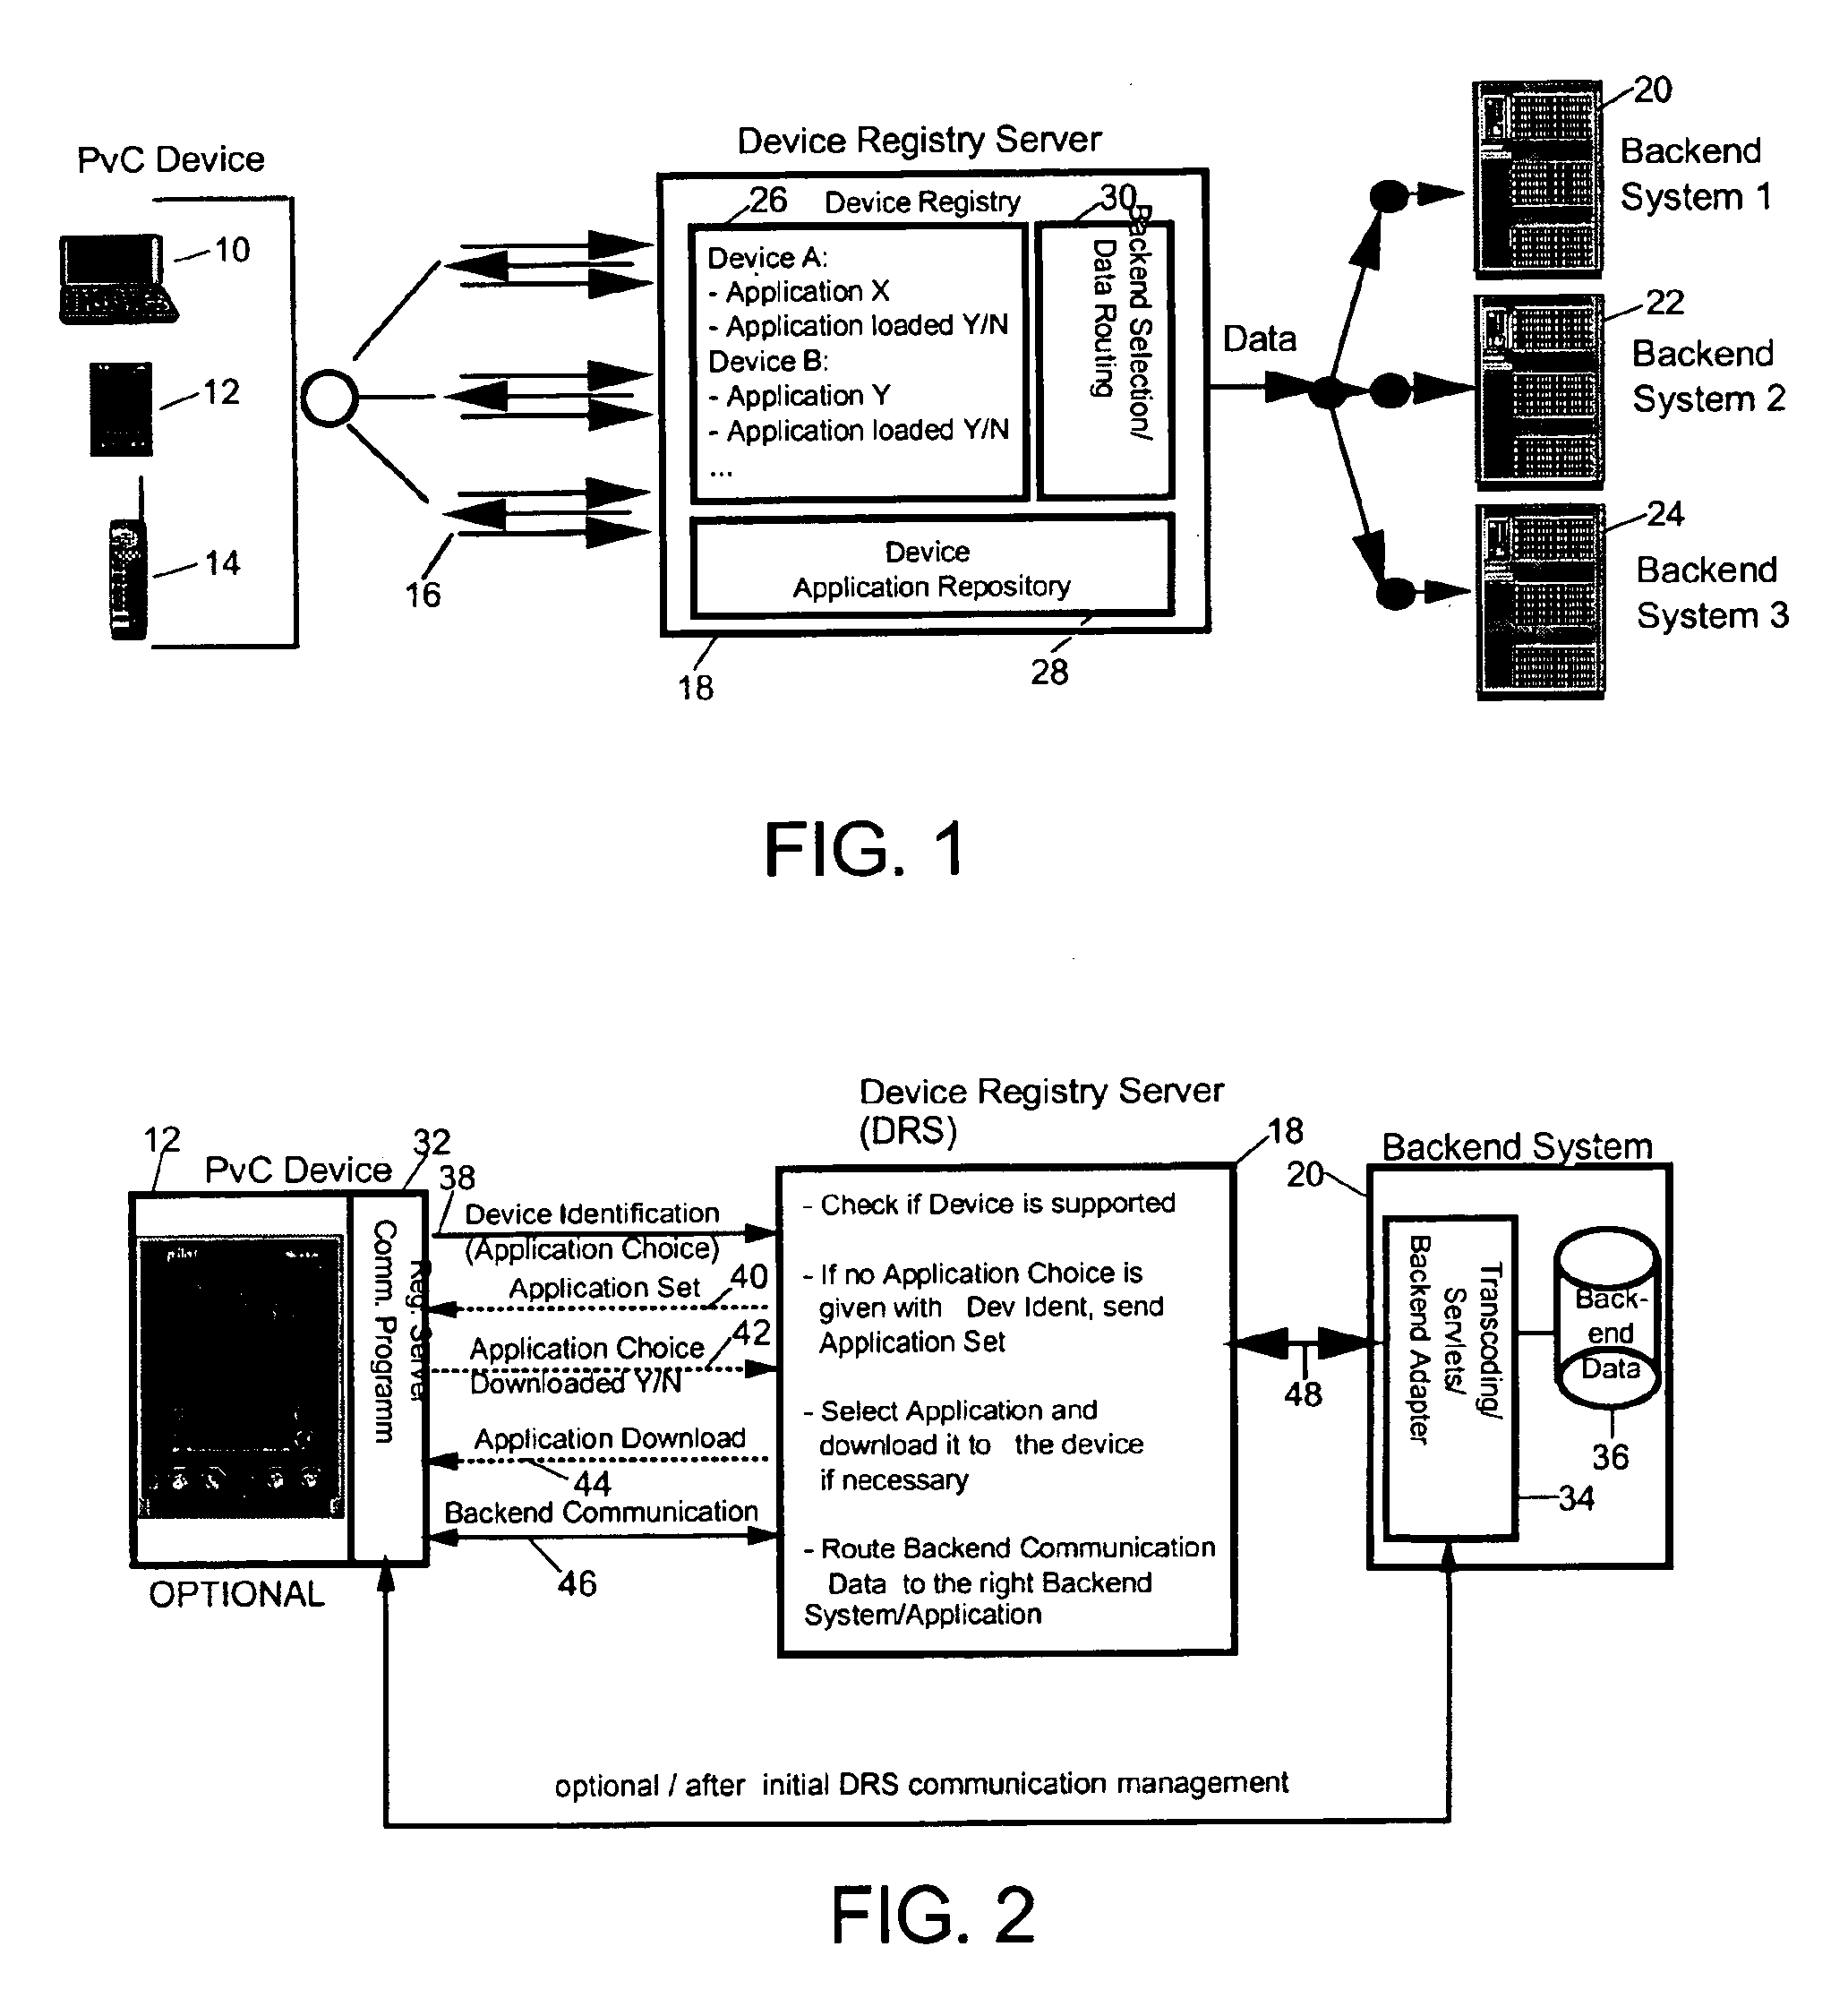 Device registry for automatic connection and data exchange between pervasive devices and backend systems